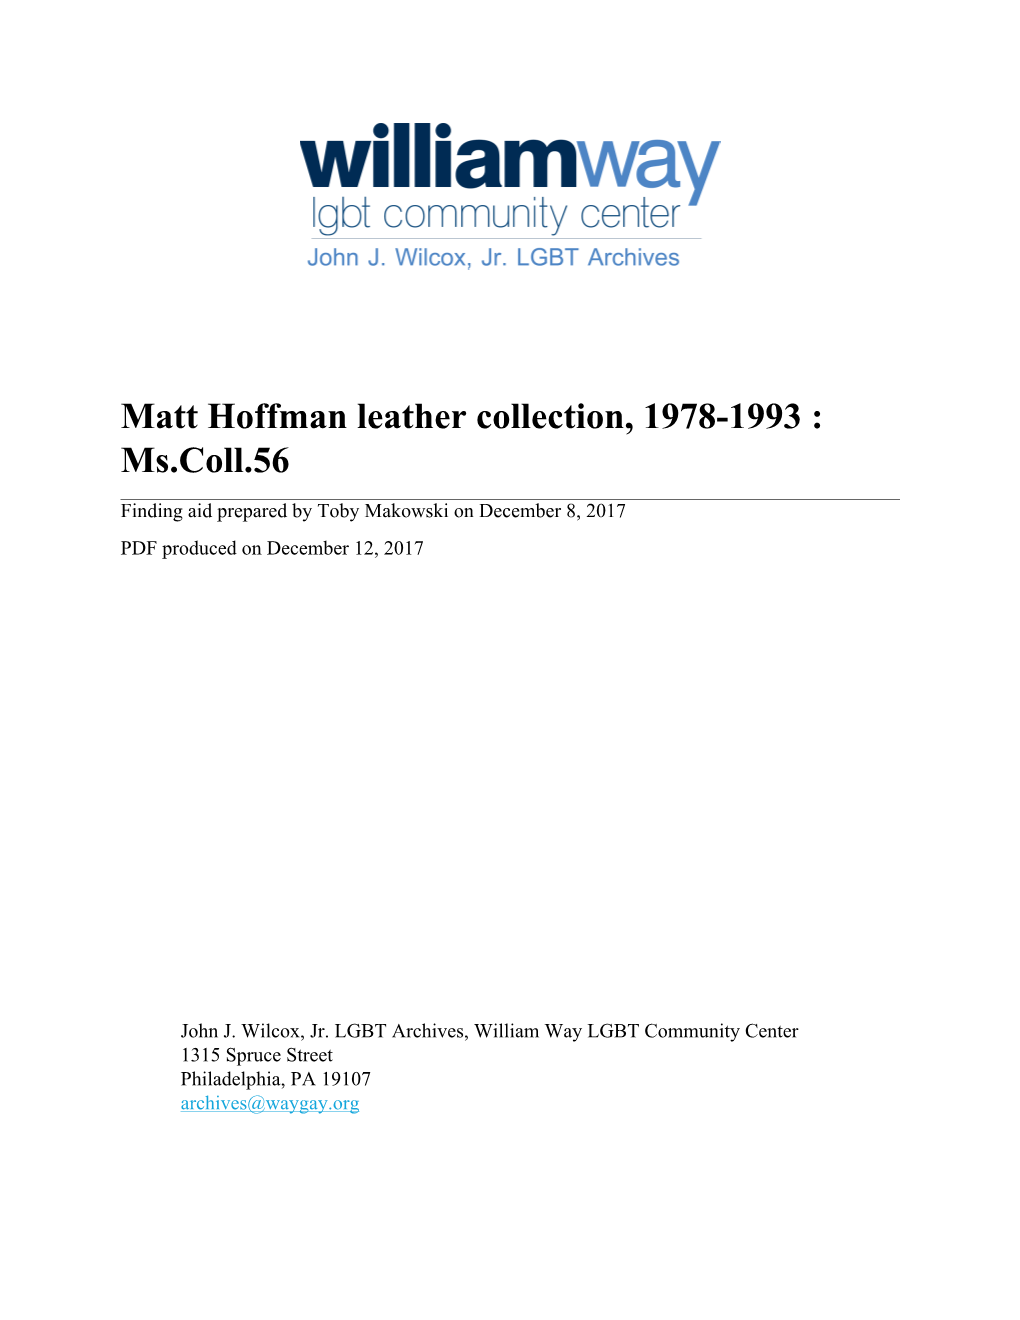 Matt Hoffman Leather Collection, 1978-1993 : Ms.Coll.56